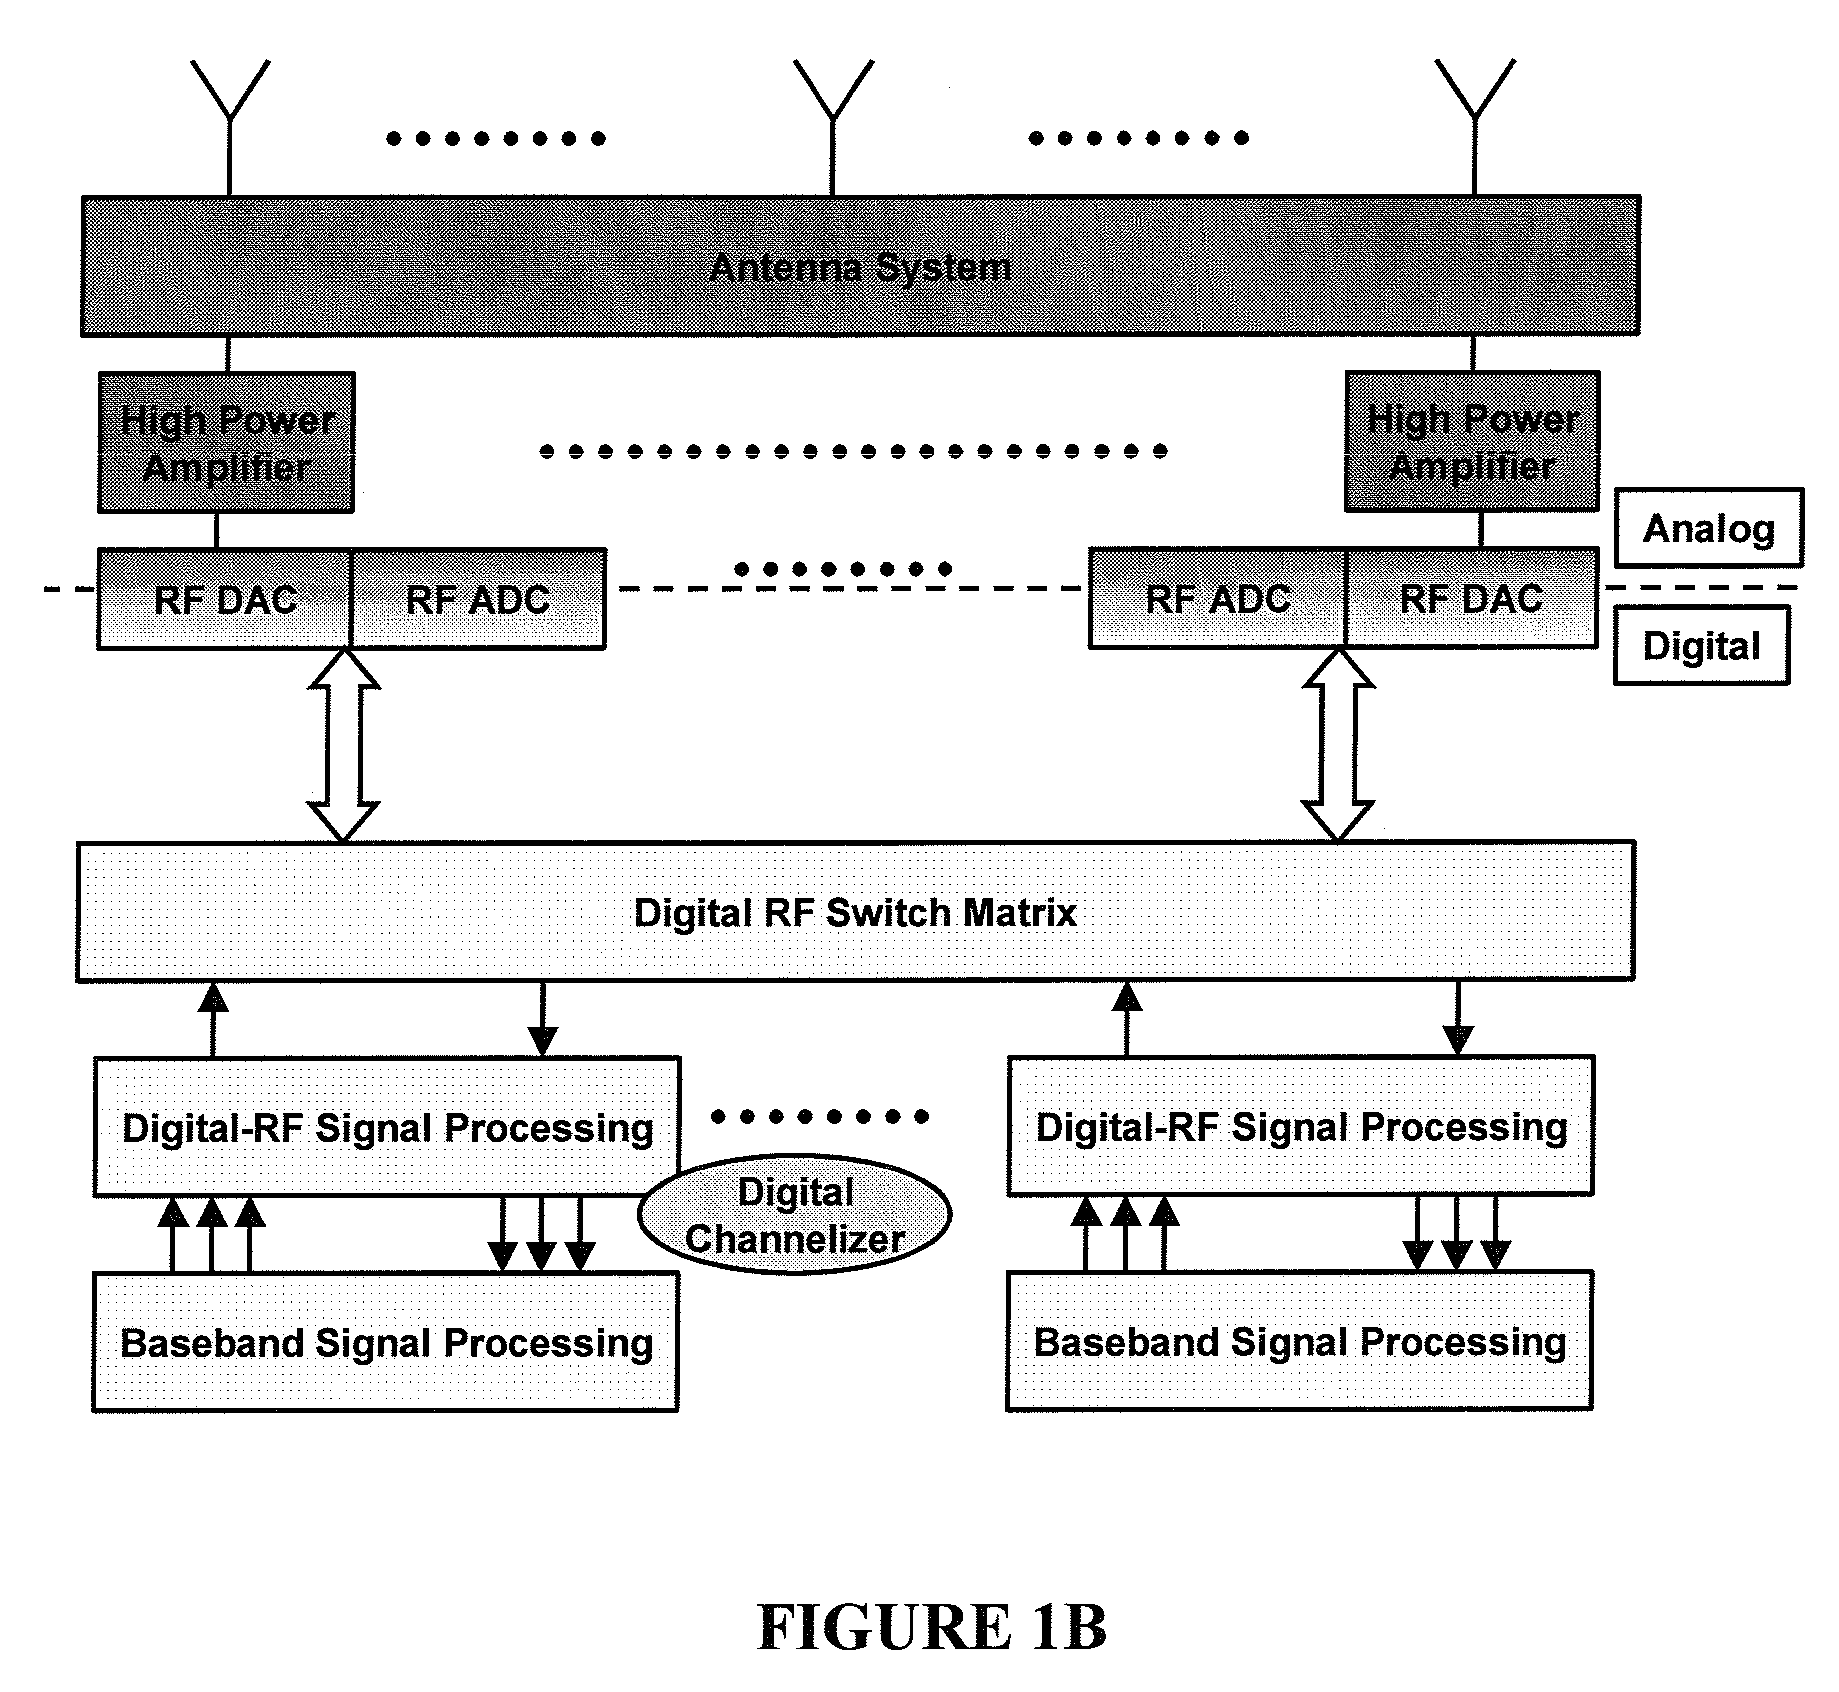 Digital routing switch matrix for digitized radio-frequency signals